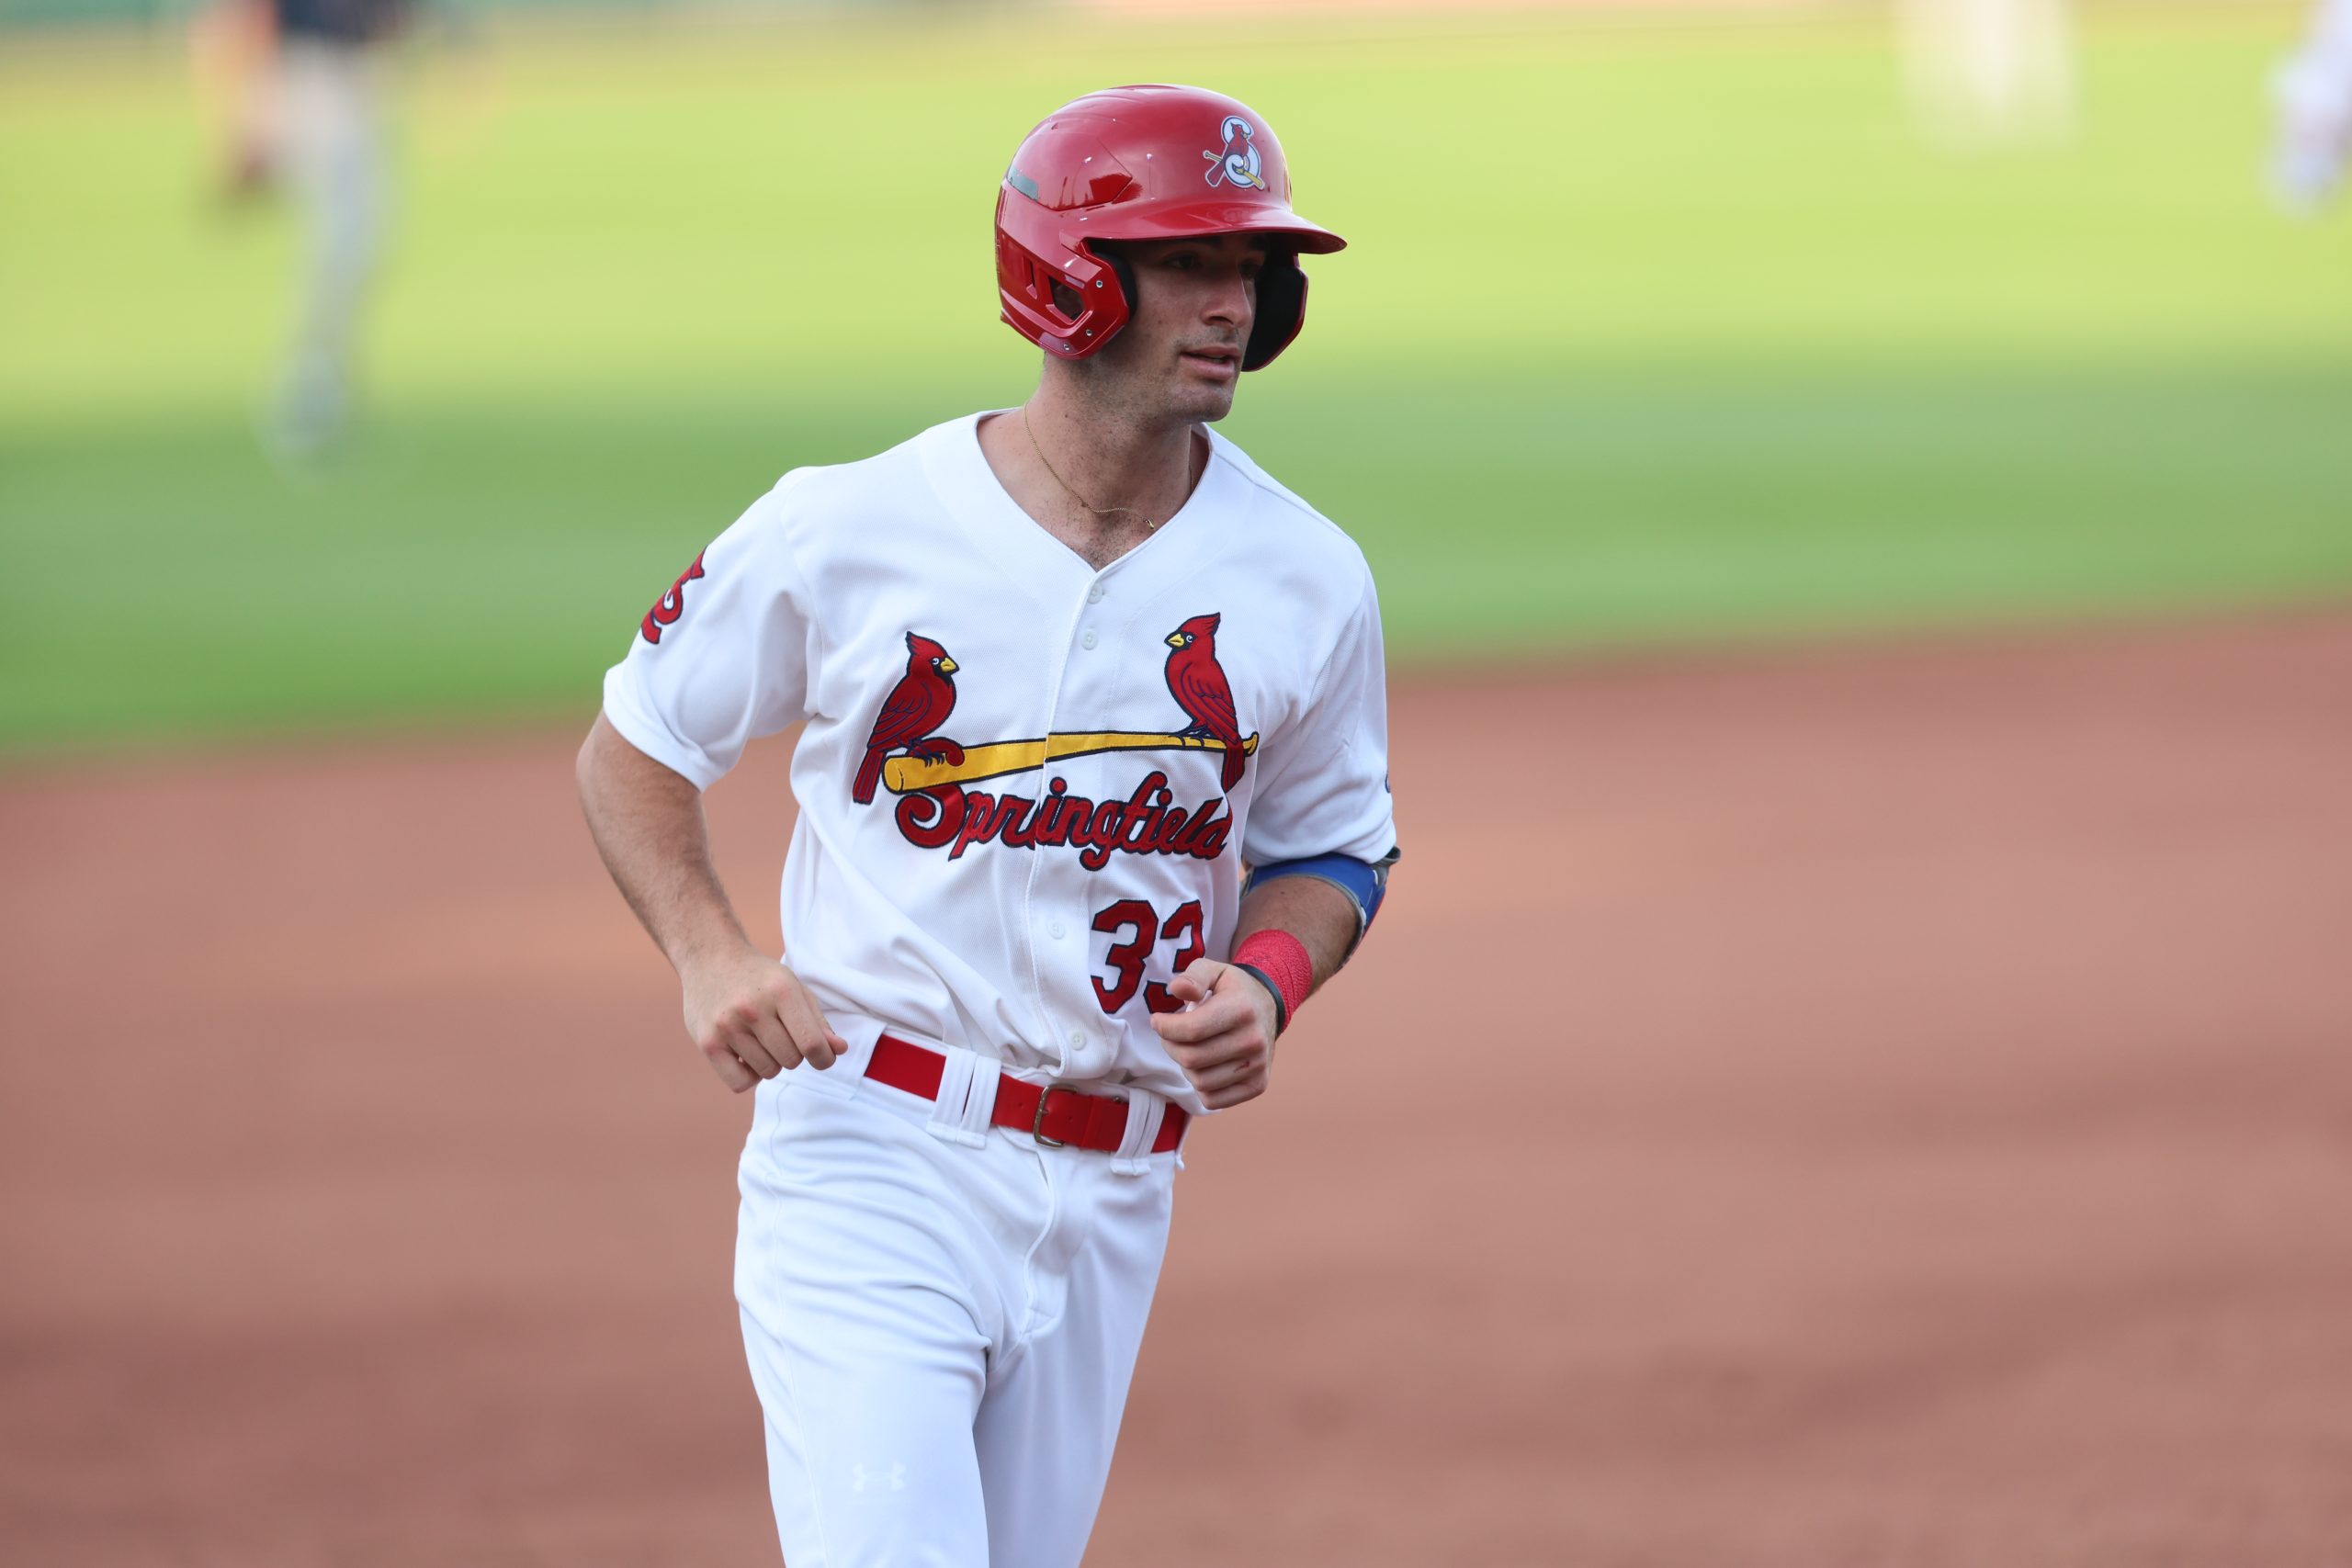 MLB trade deadline also impacts minor leaguers, like new Springfield Cardinal Thomas Saggese